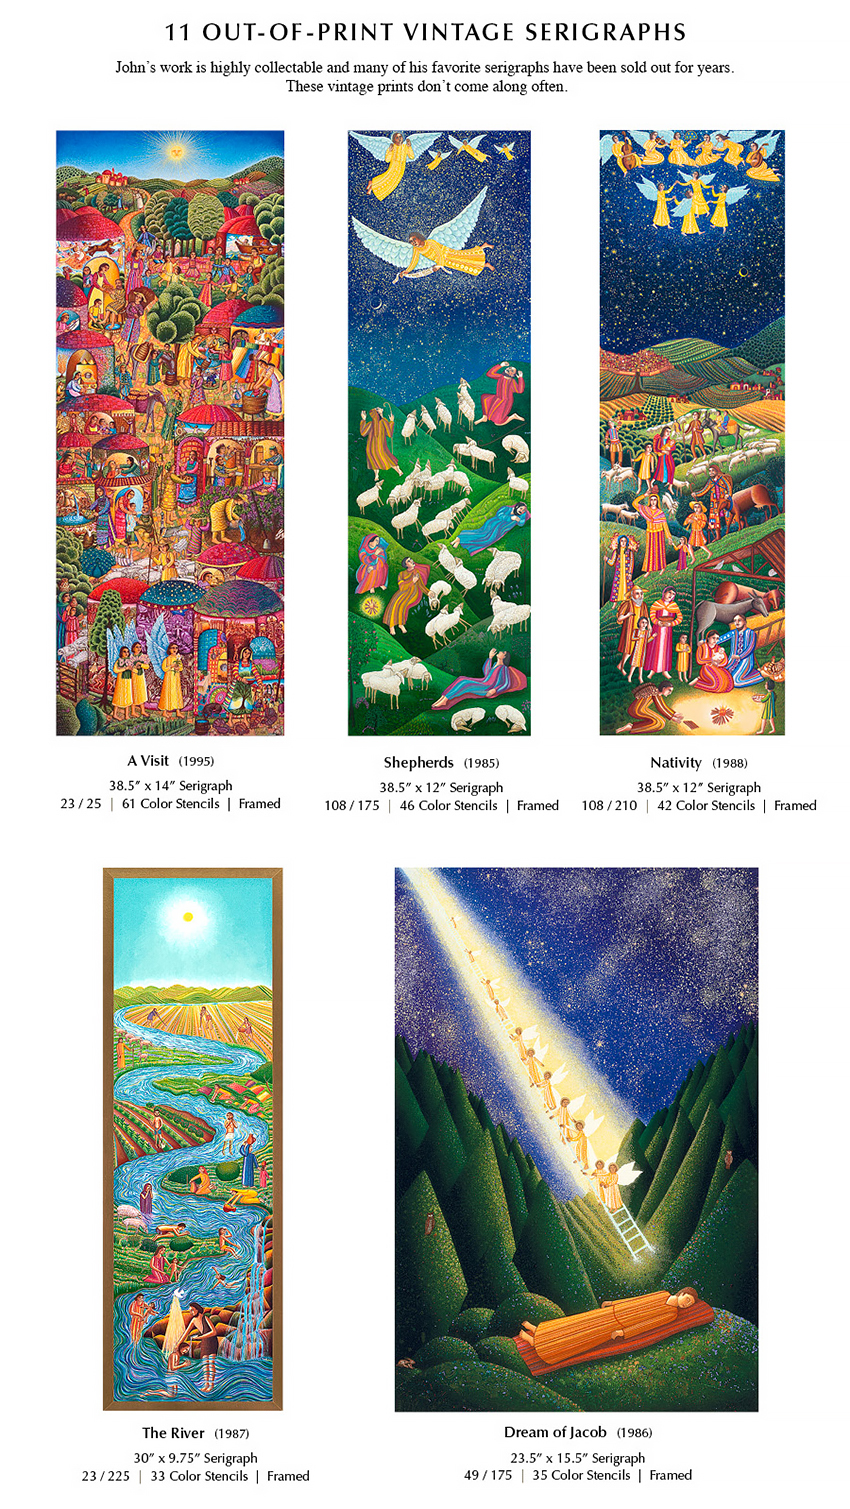 The John August Swanson serigraphs are a one-time offer - only 1 left of each Serigraph. Eyekons is a source for Christian art, religious art, biblical art and church art.